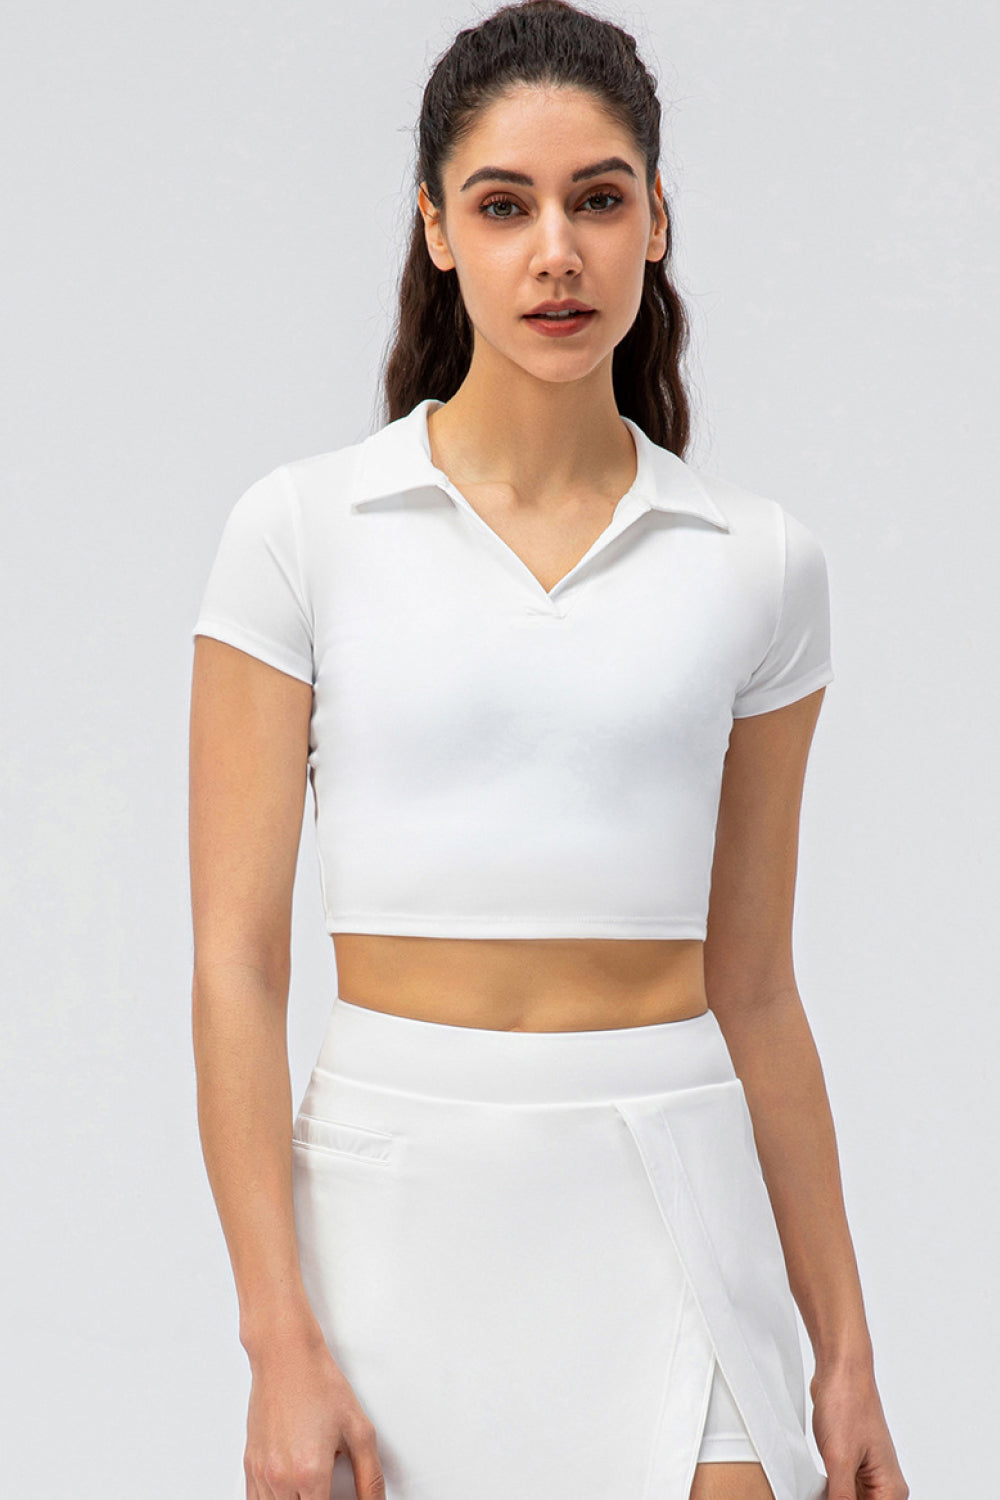 Cropped Short Sleeve Collared Yoga Top